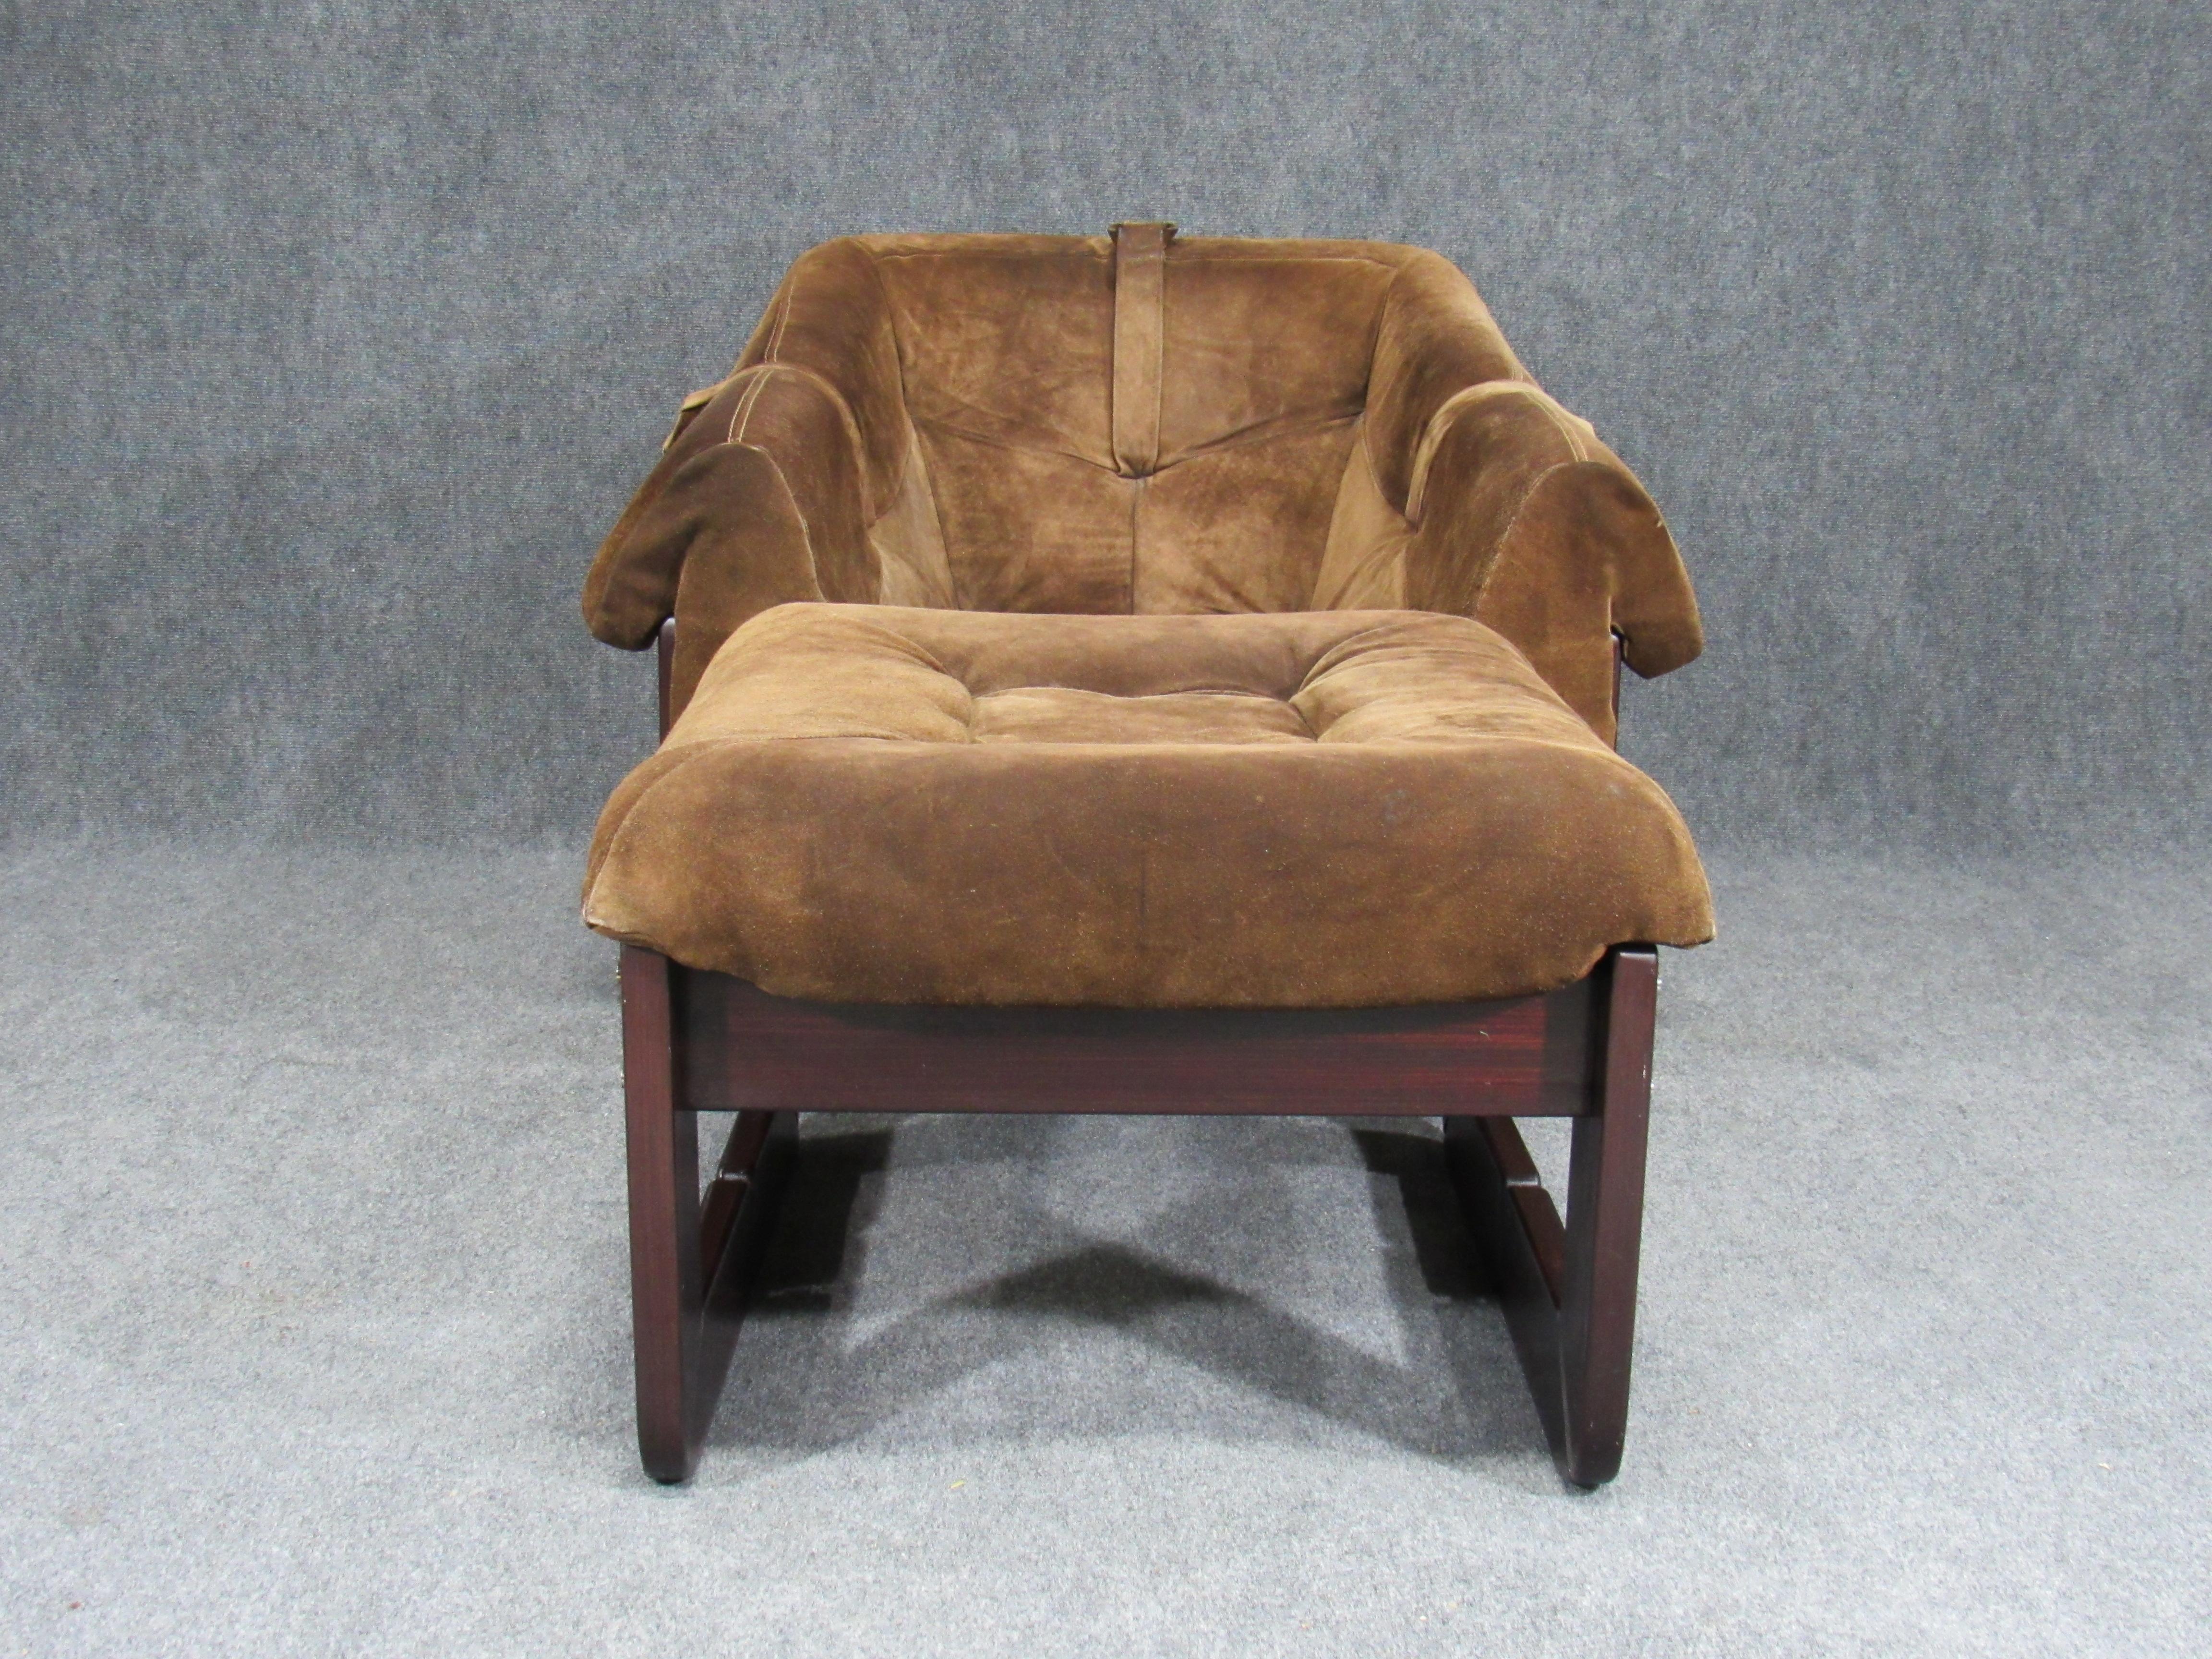 Brazilian Mid-Century Modern Armchair and Ottoman by Percival Lafer in Chocolate 1